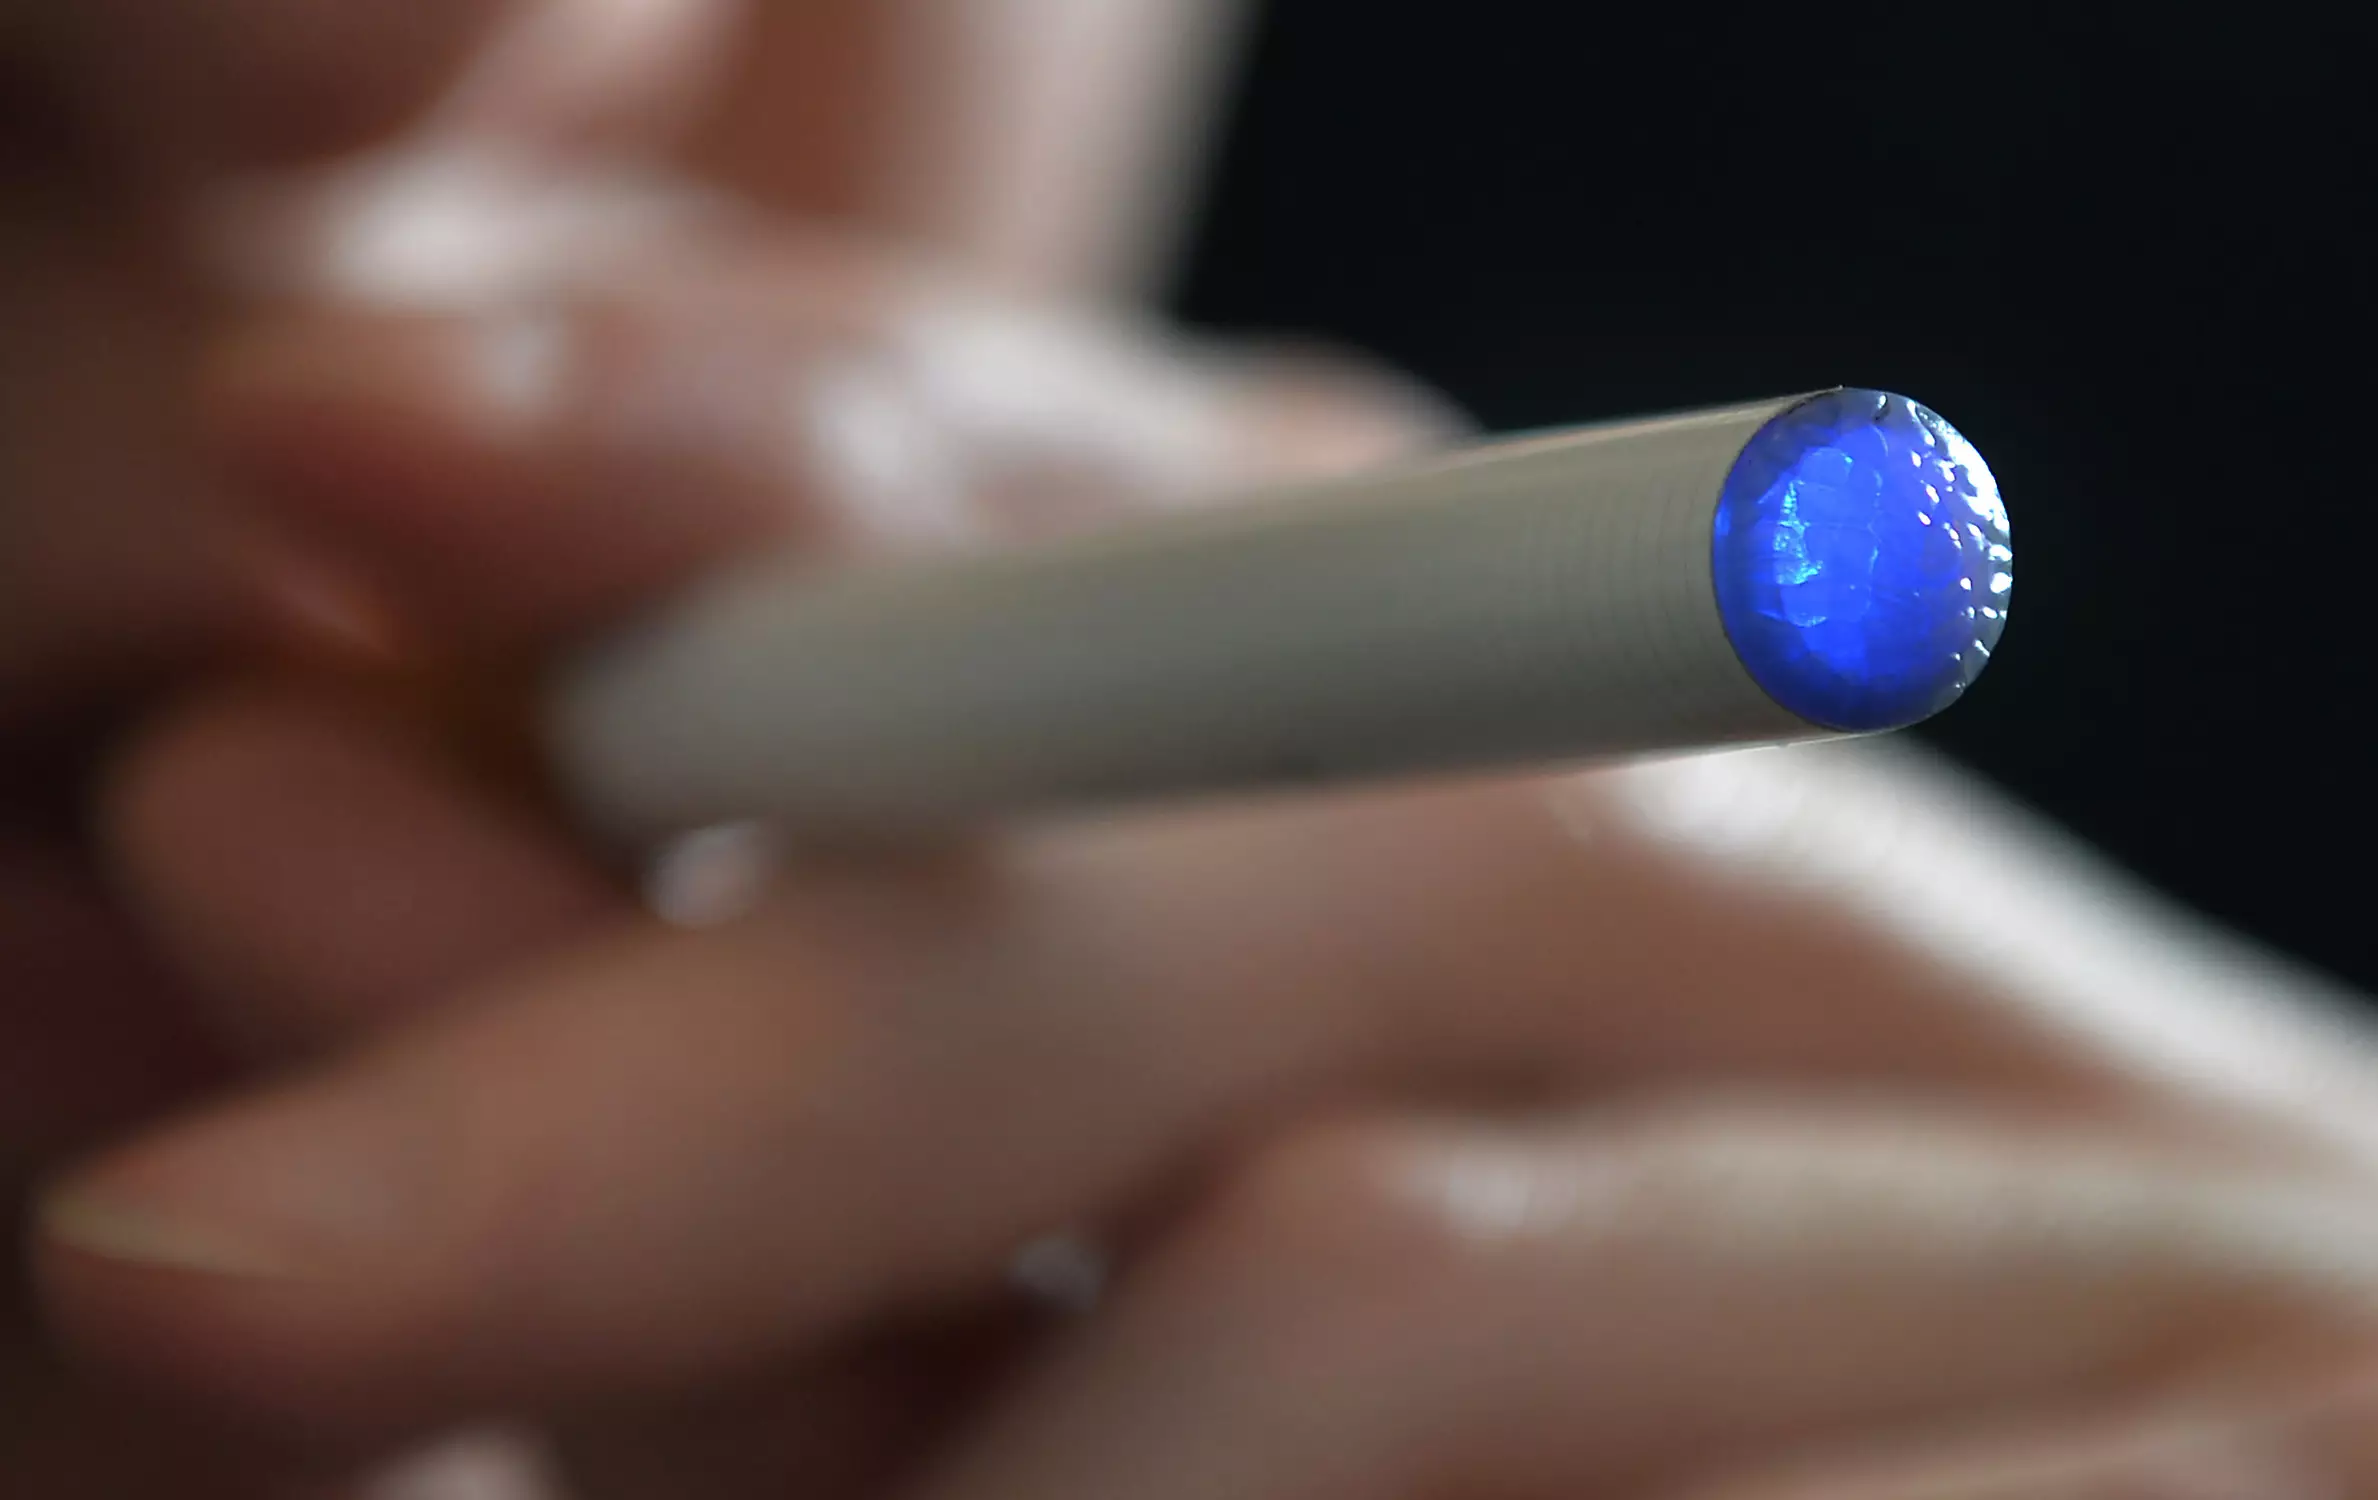 The first person has died due to an illness caused by vaping, US health officials have said.